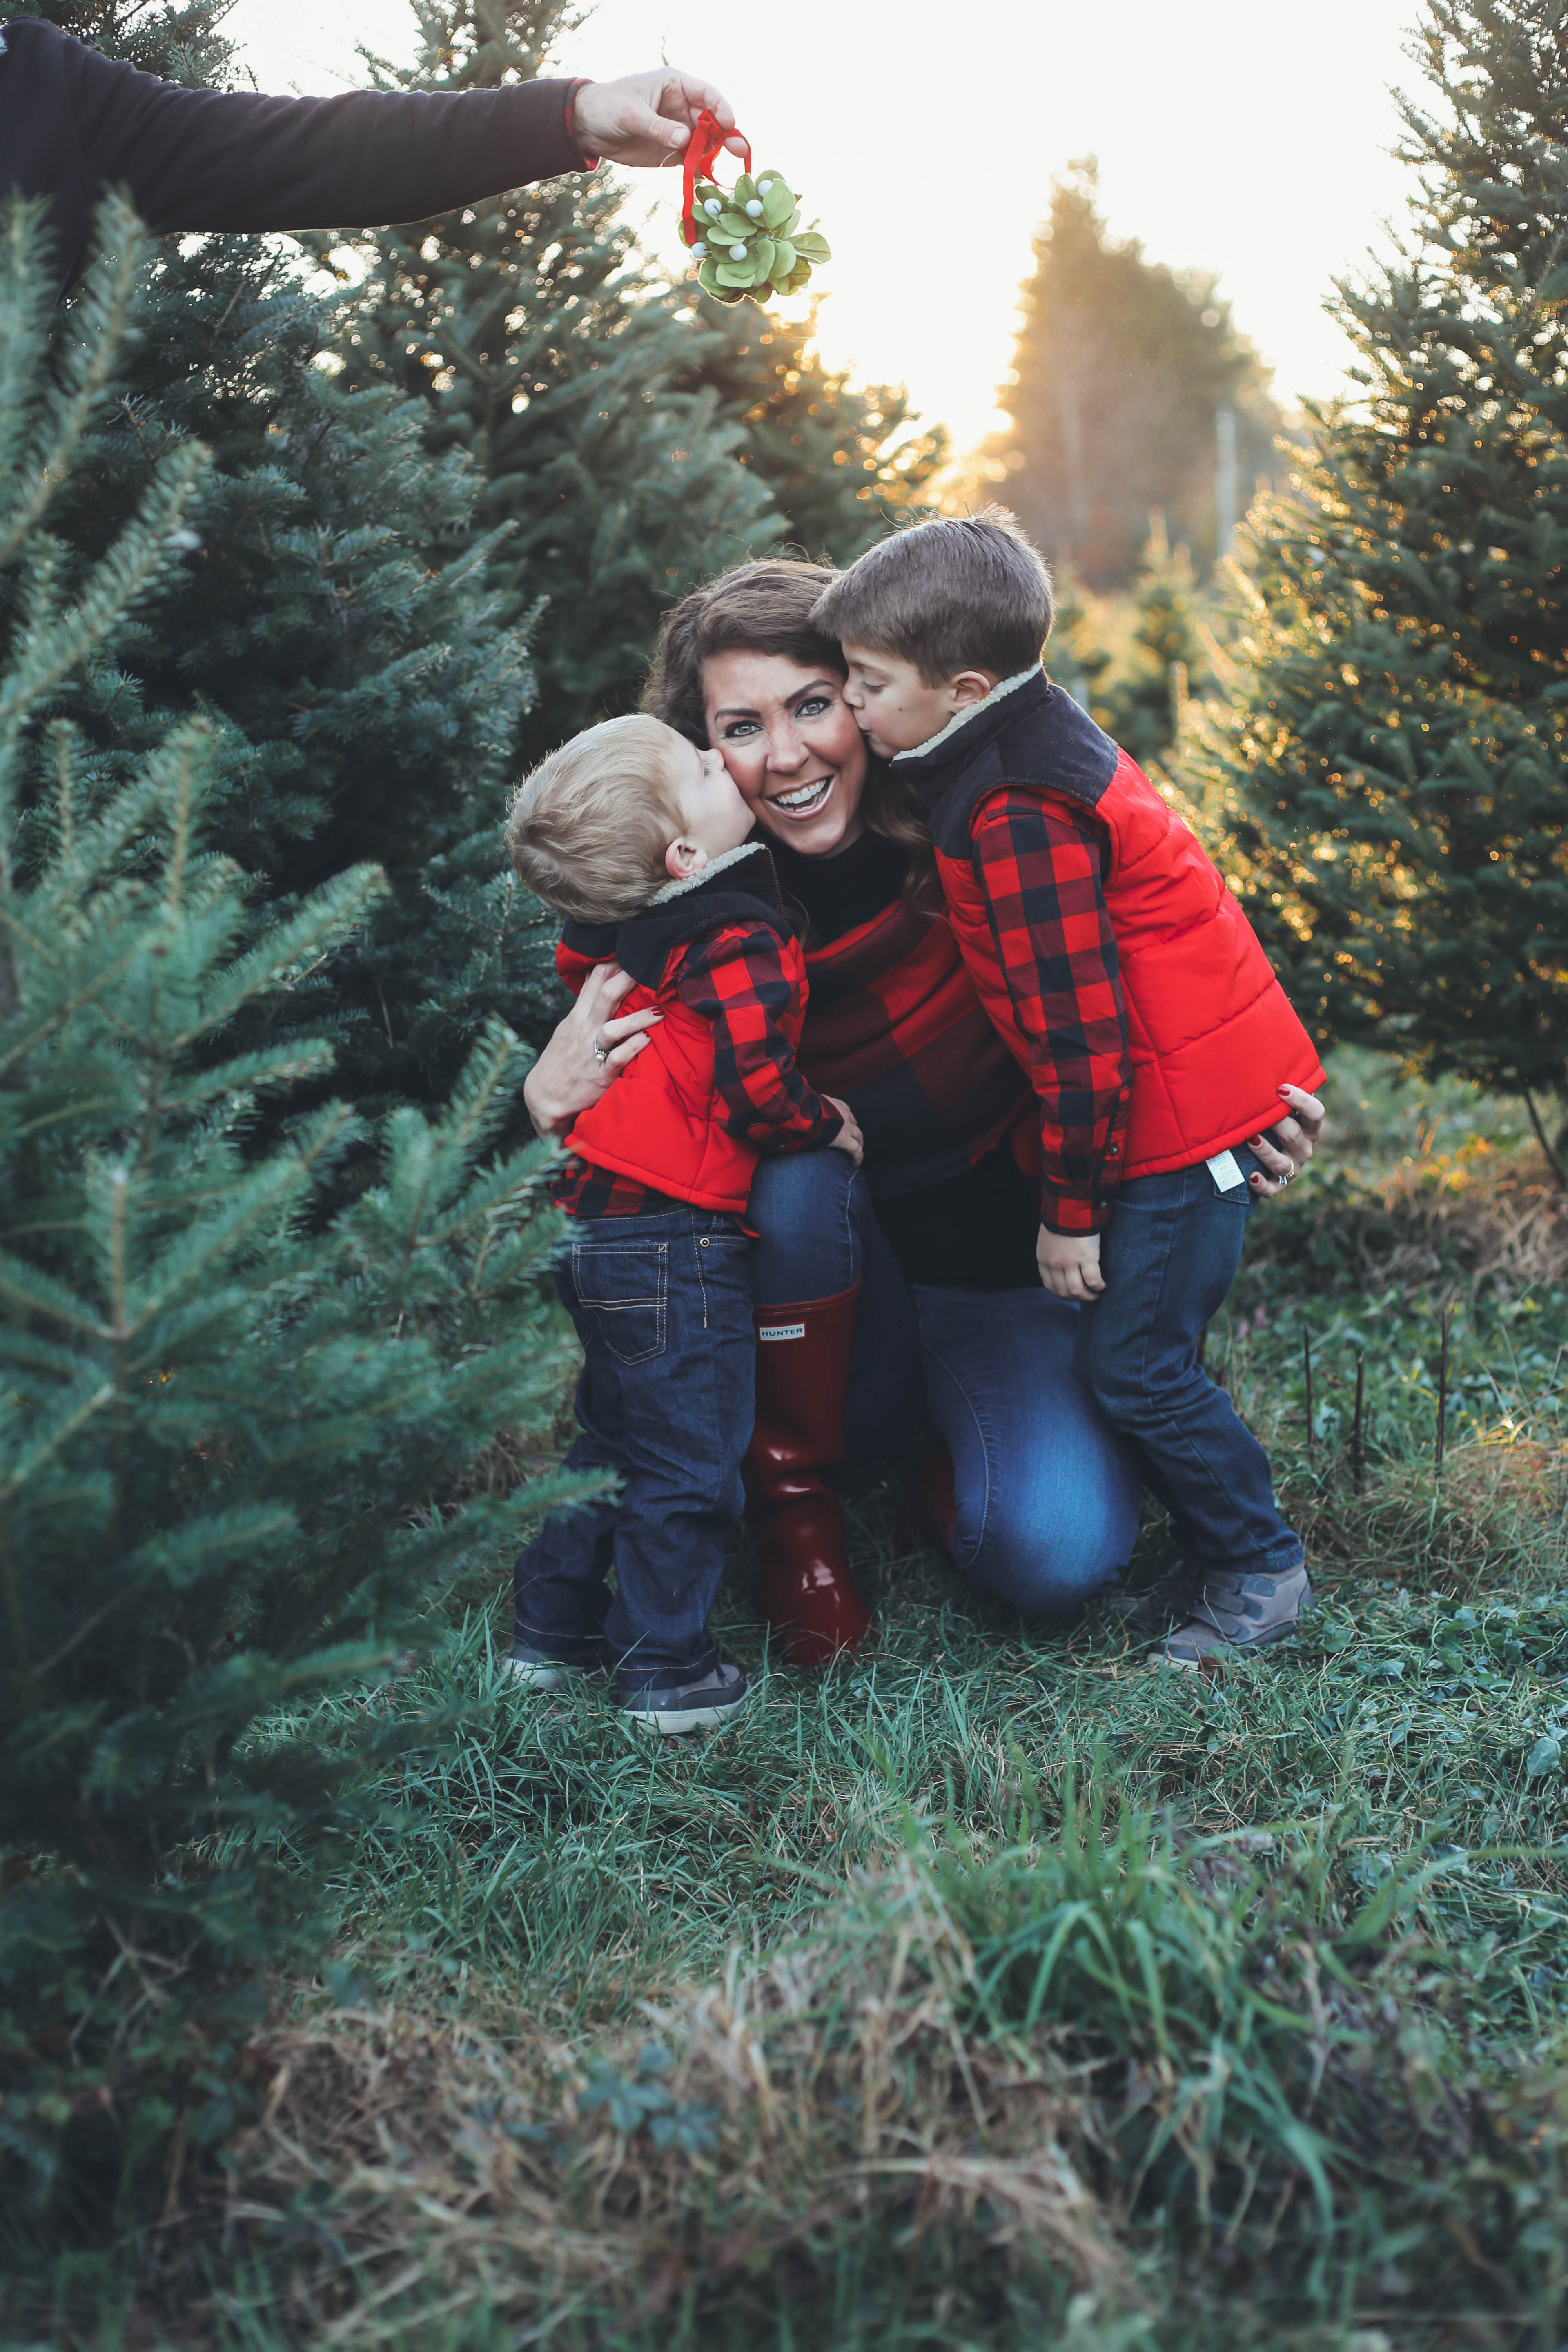 Merry Christmas + Tree Farm Family Pictures - From The Family With Love